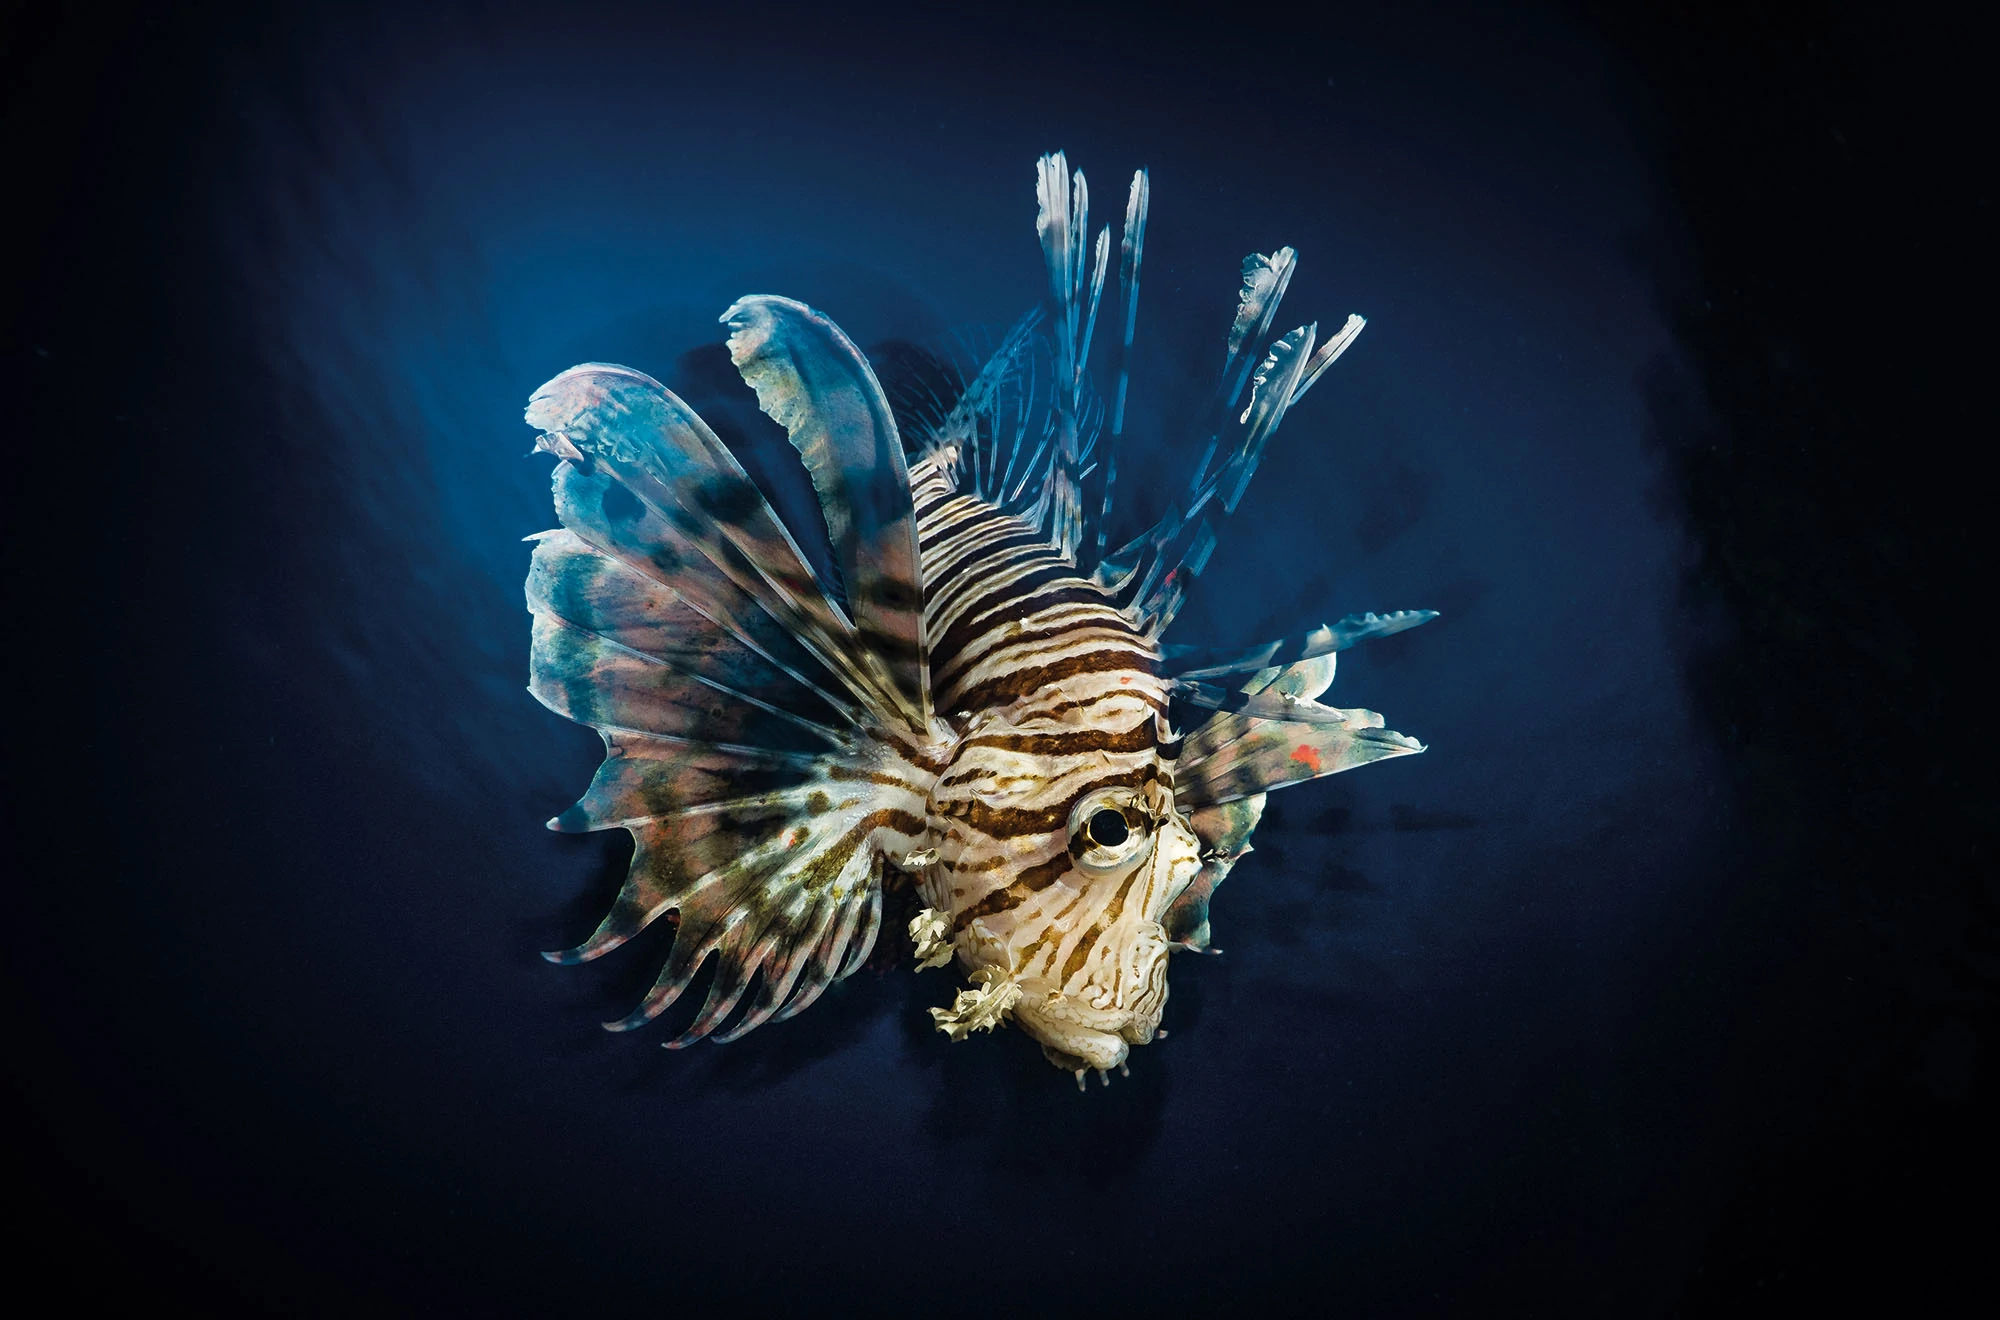 LionFish - Photographs by Paul Duxfield